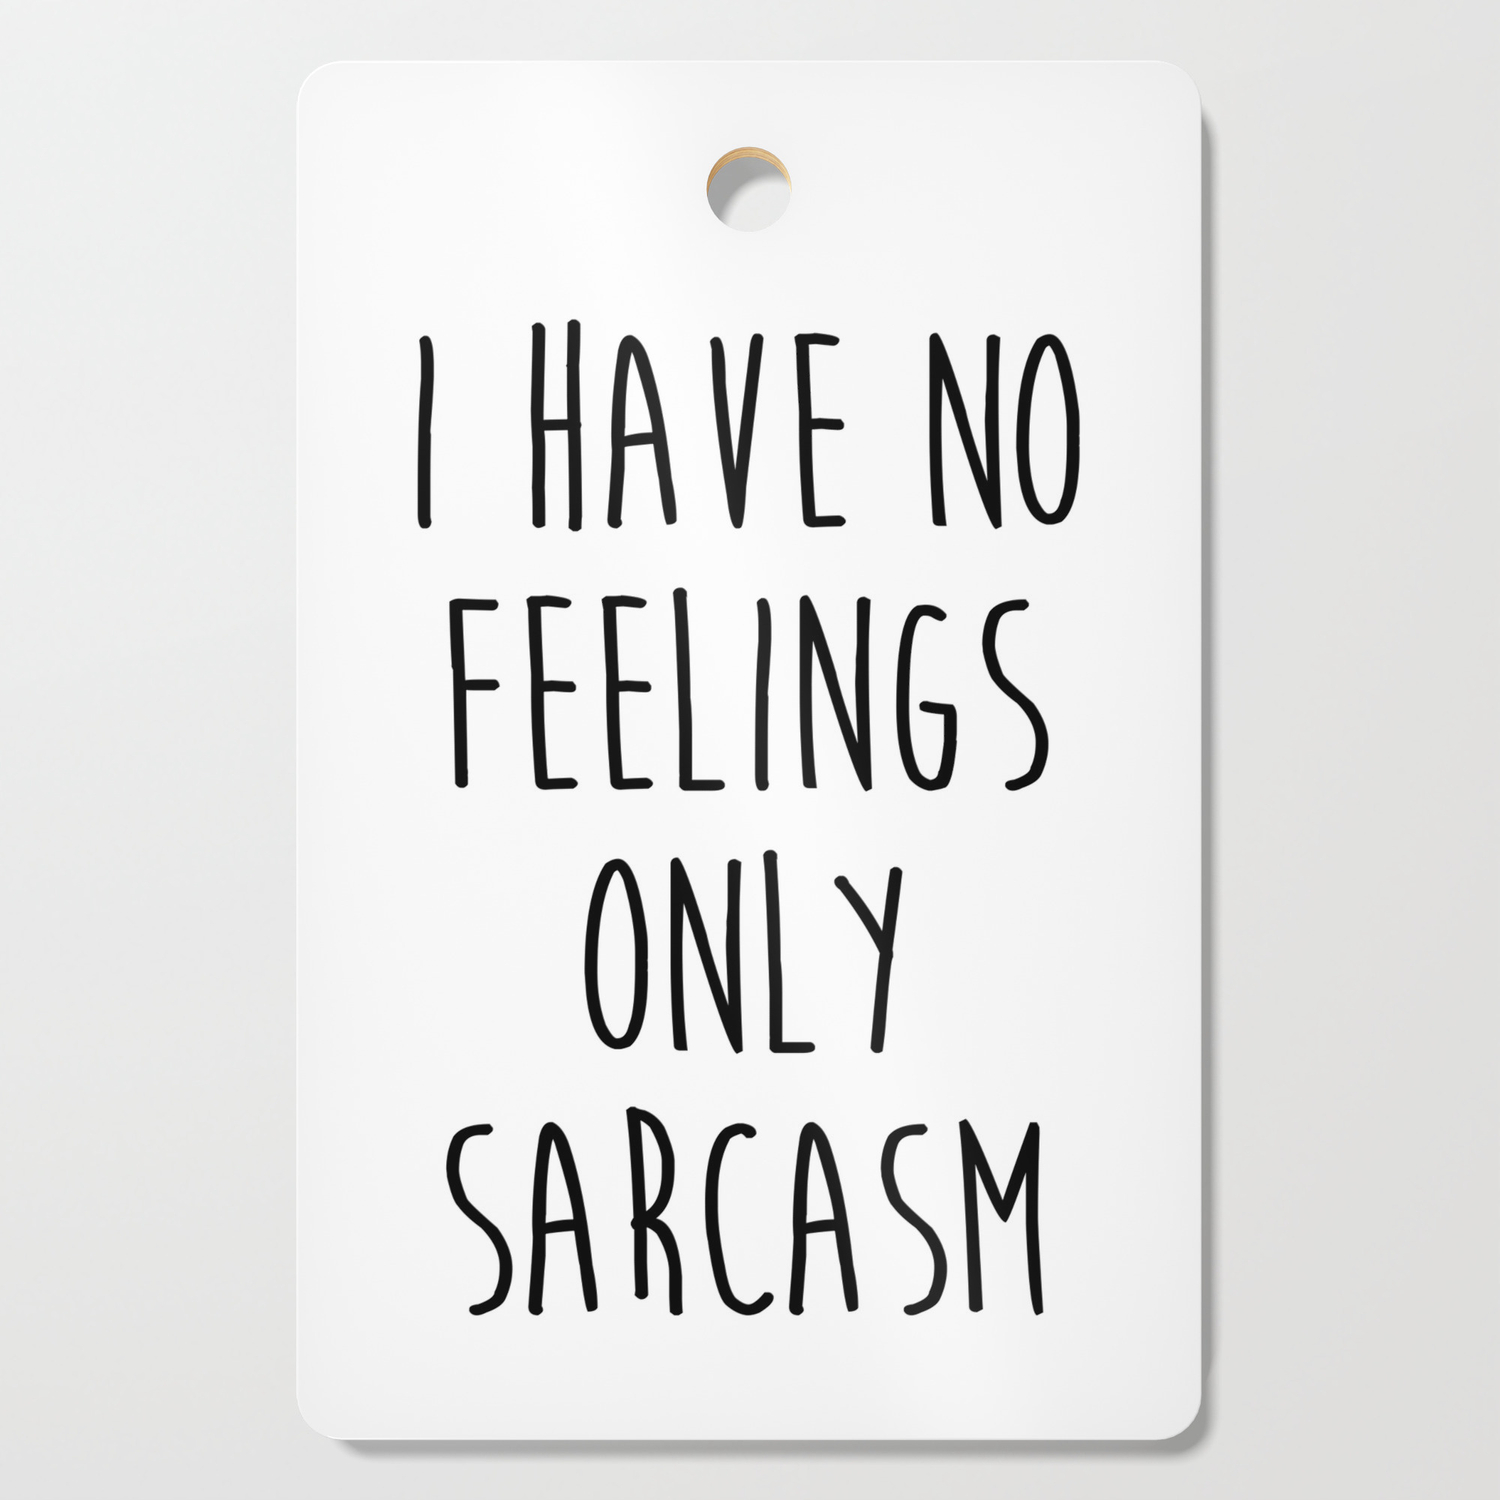 No Feelings Only Sarcasm Funny Quote Cutting Board by EnvyArt | Society6